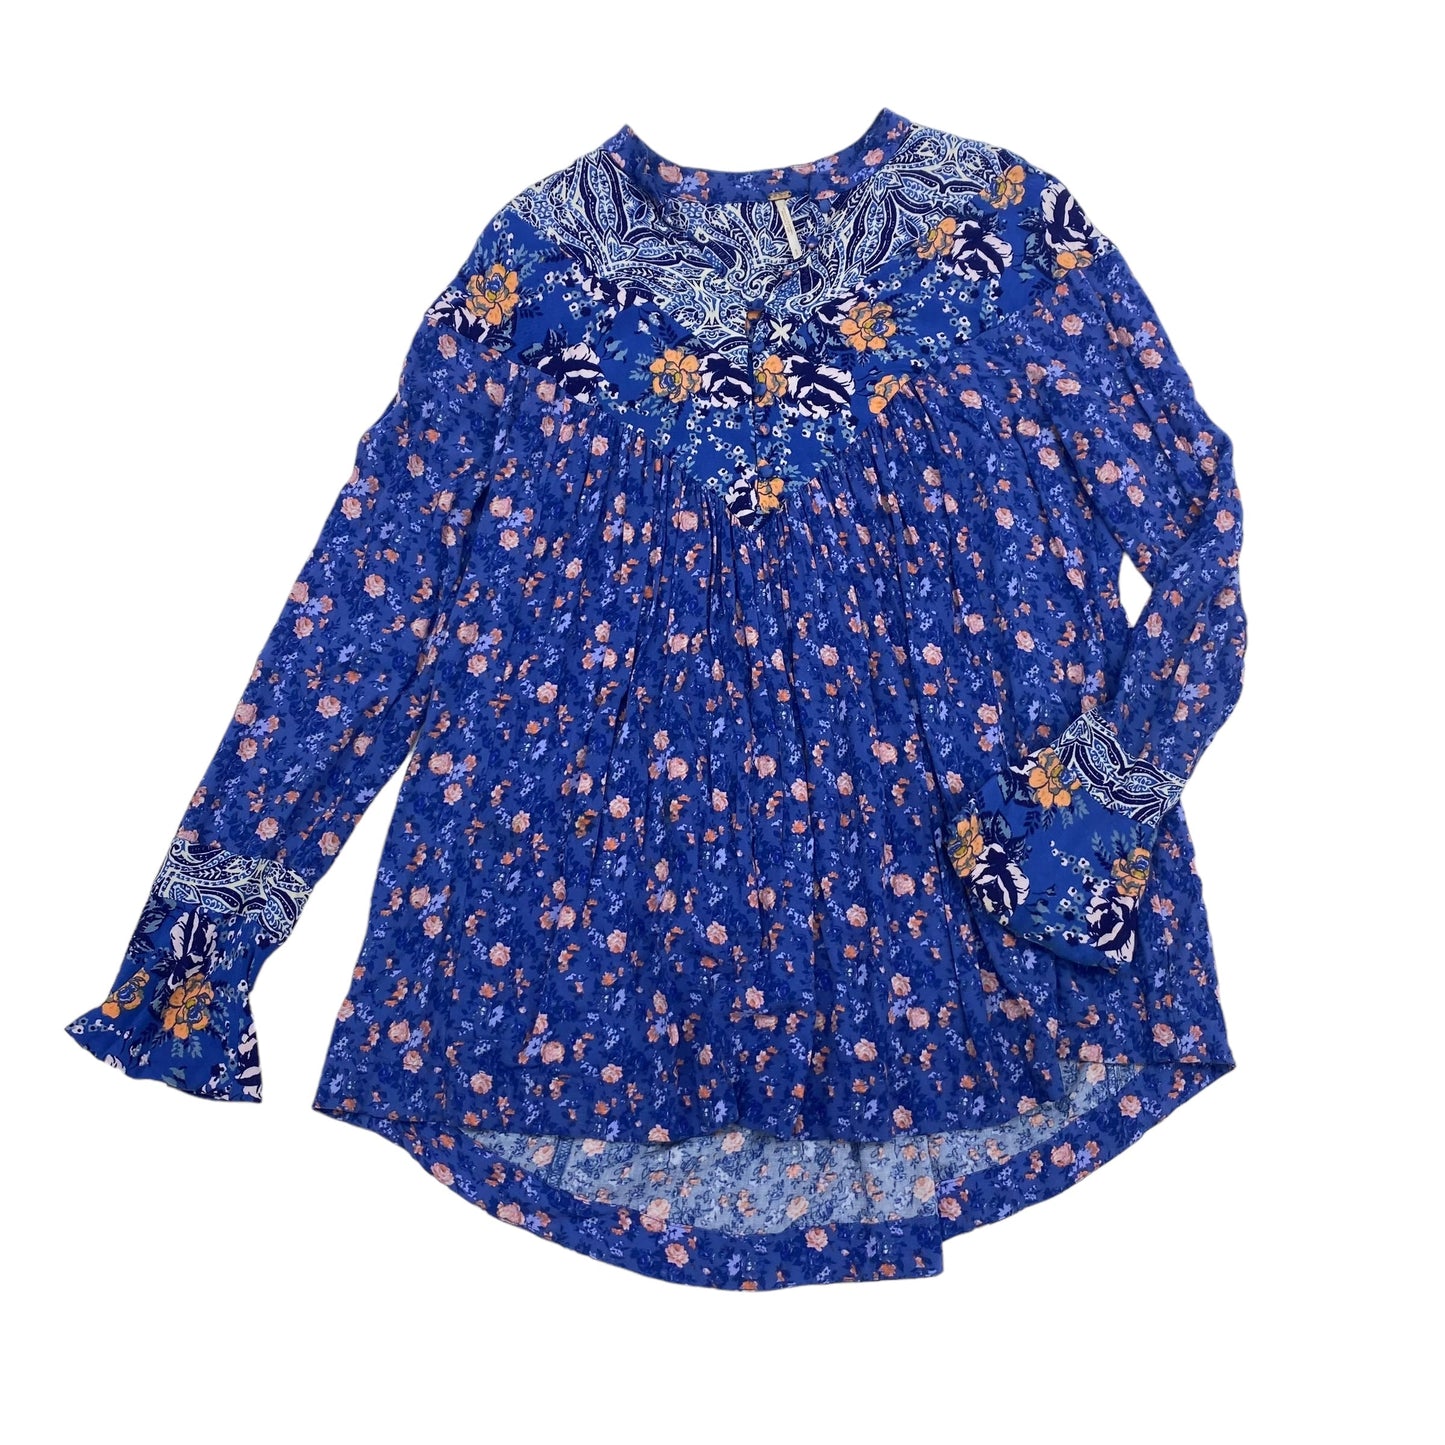 BLUE TUNIC LS by FREE PEOPLE Size:S